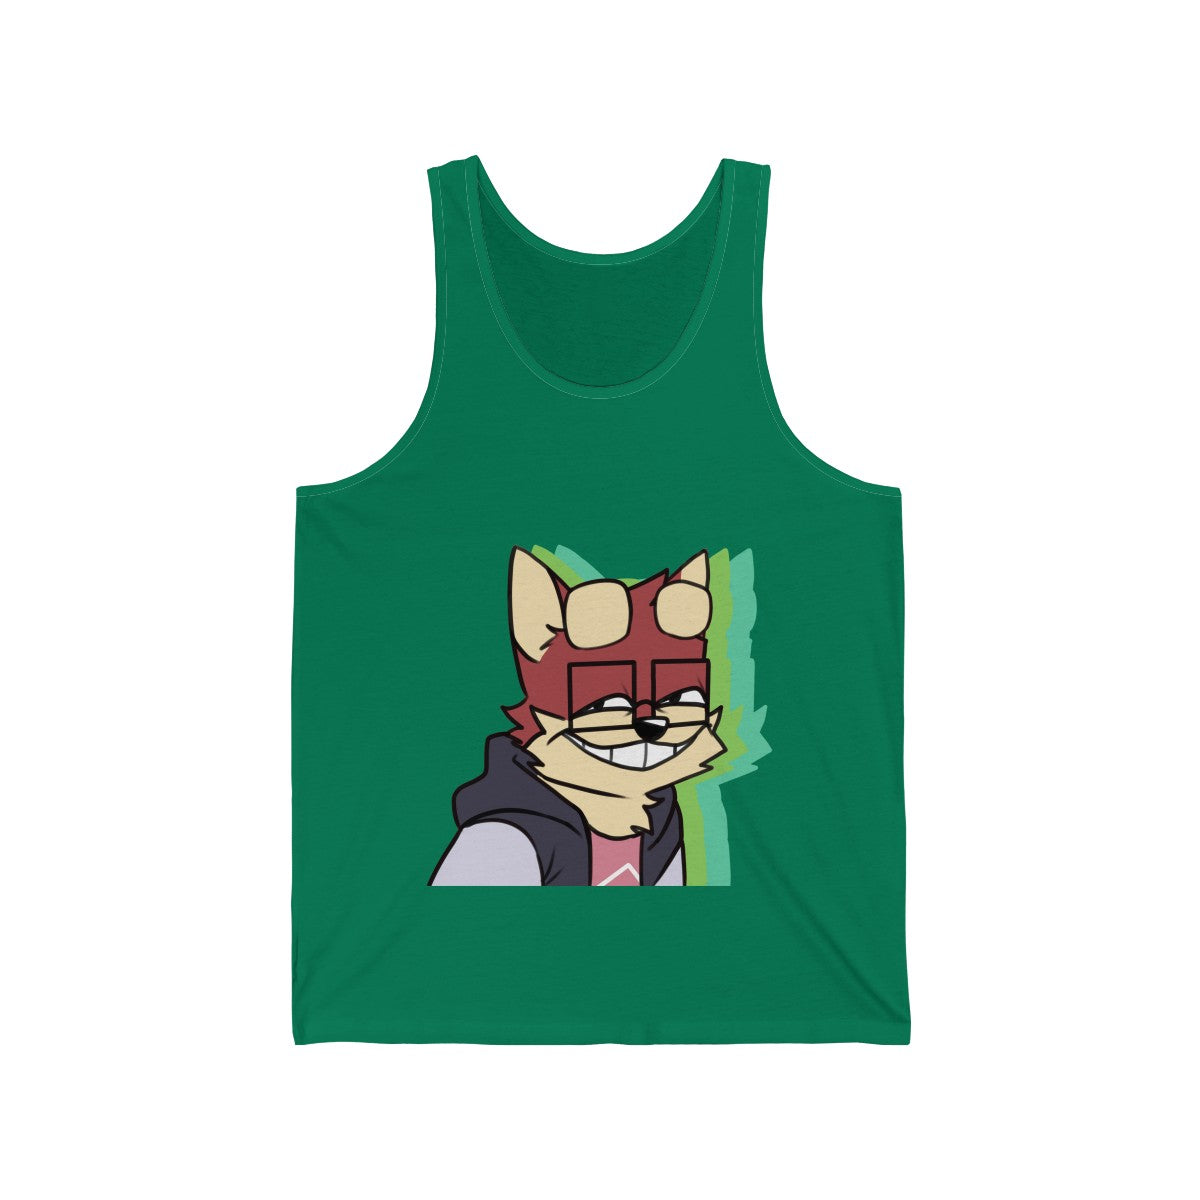 Thinking About You - Tank Top Tank Top Ooka Green XS 